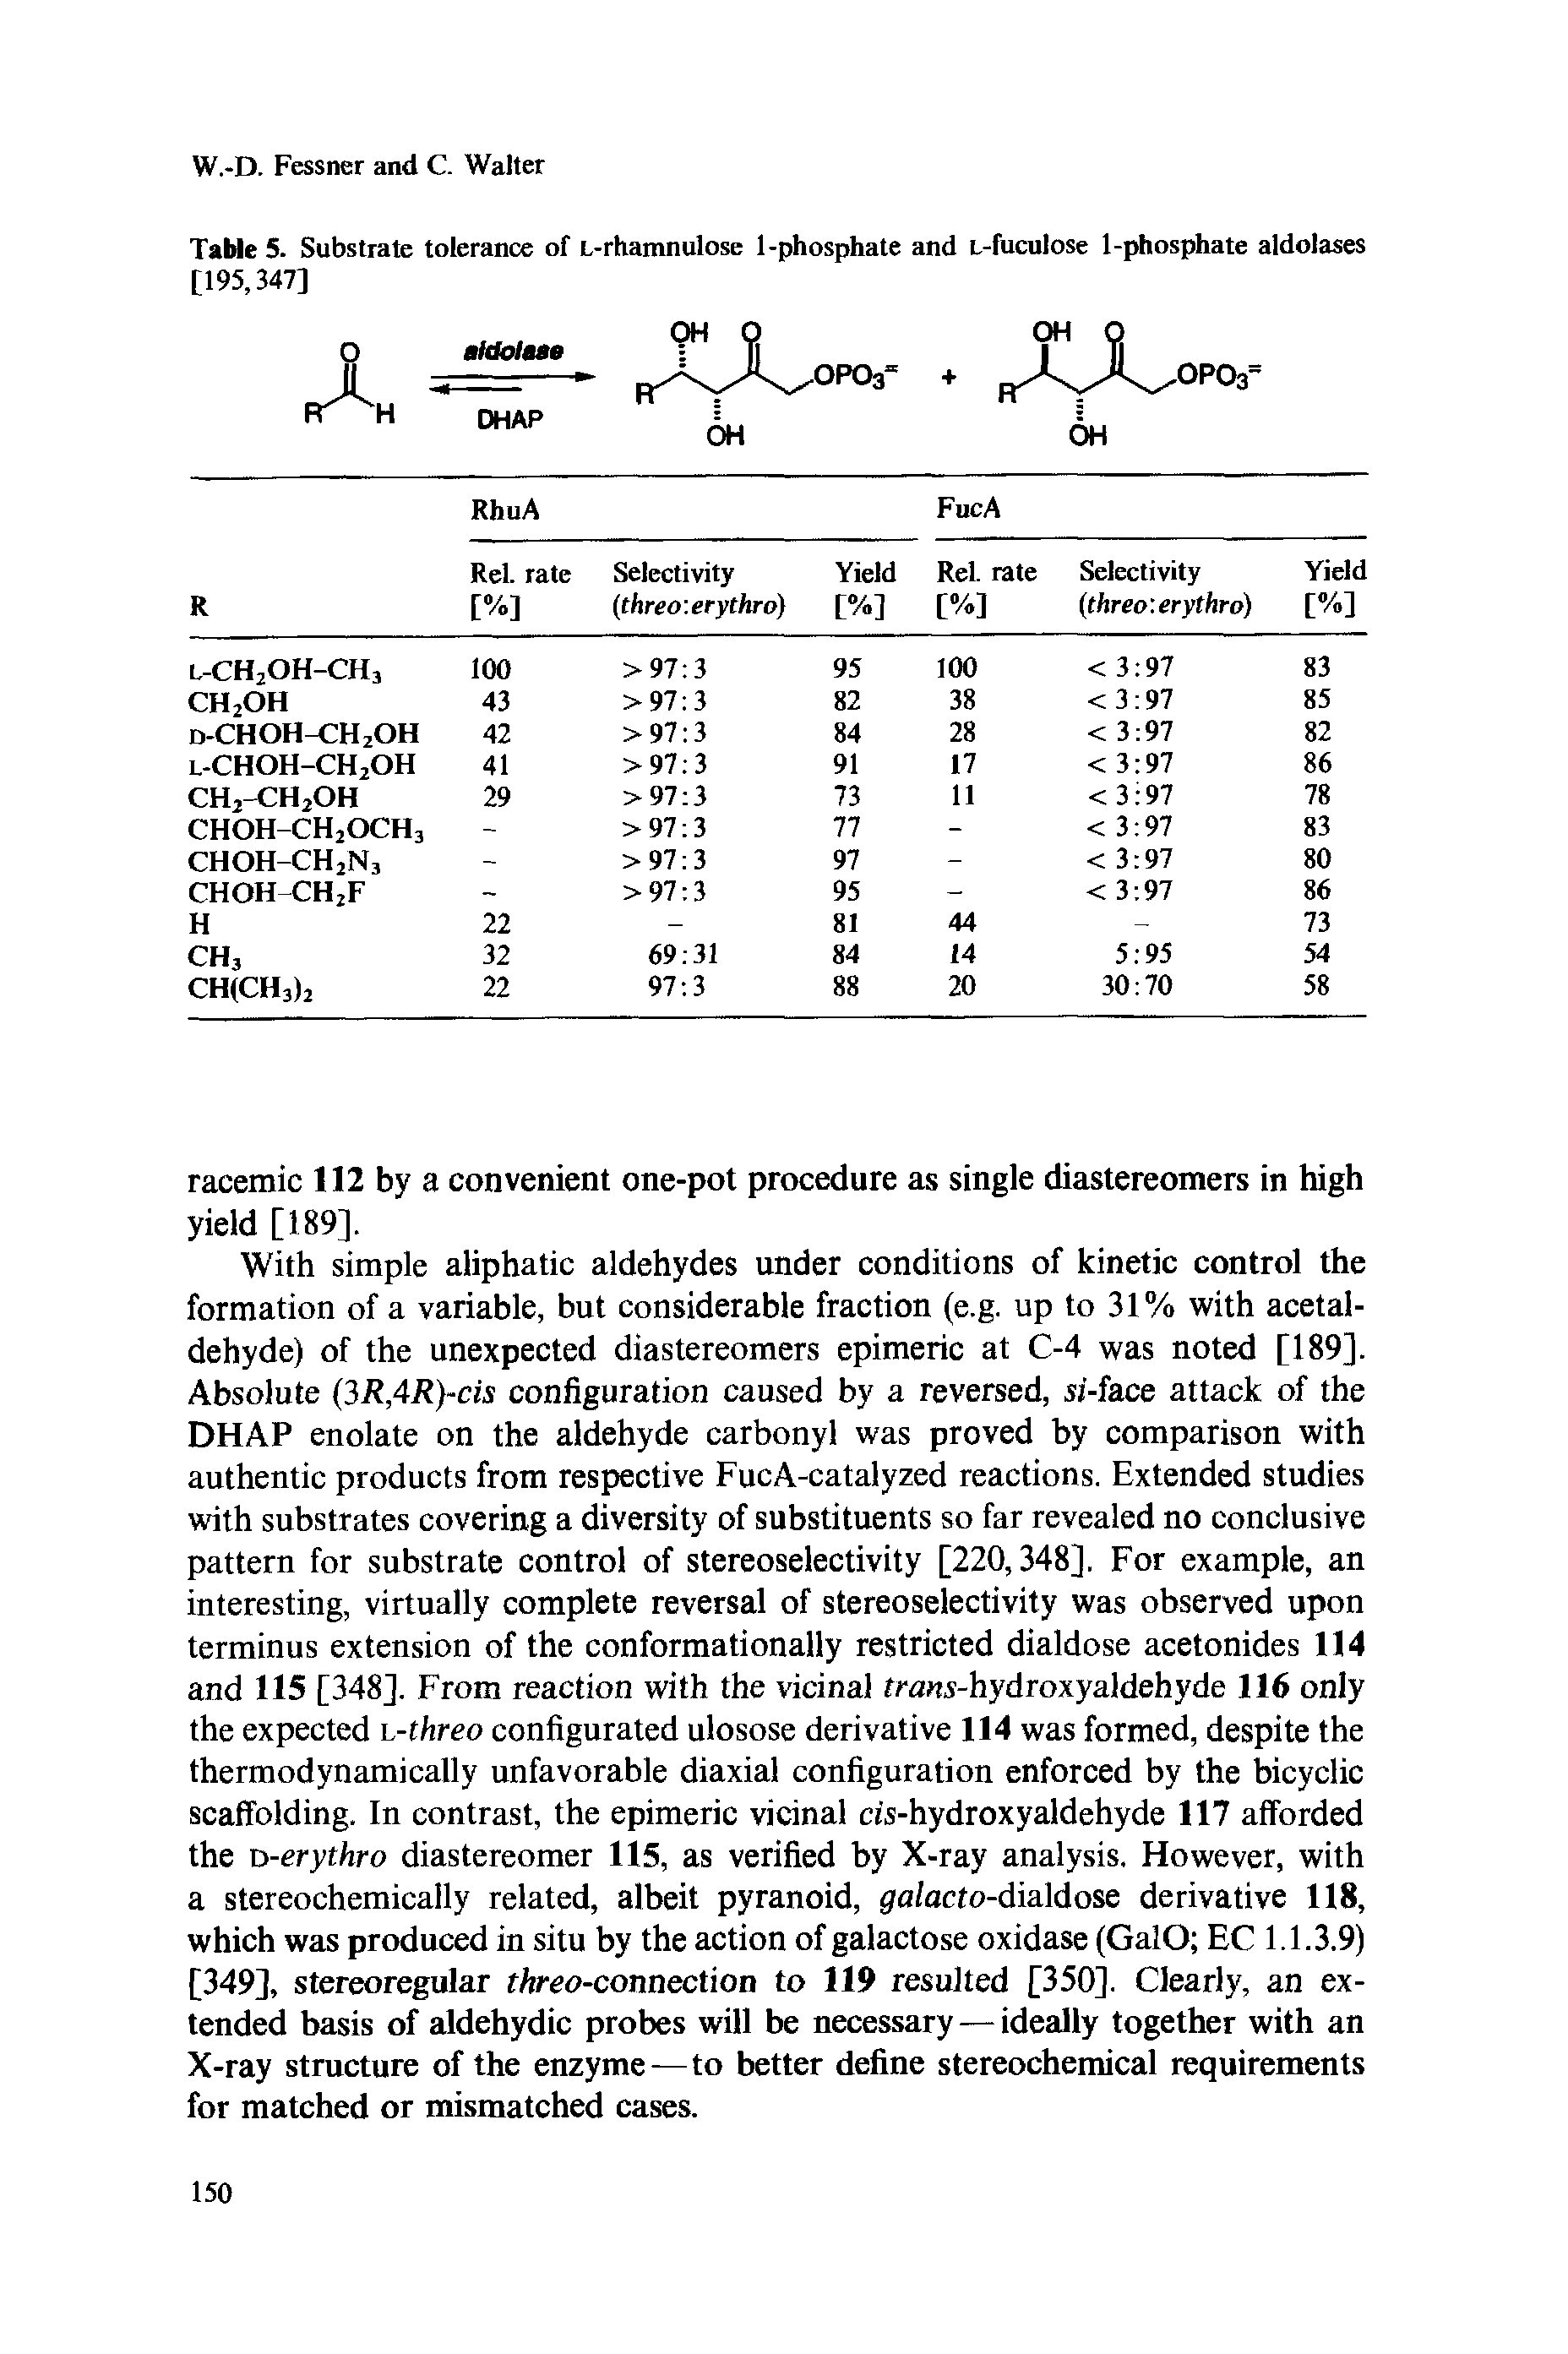 Table 5. Substrate tolerance of L-rhamnulose 1-phosphate and L-fuculose 1-phosphate aldolases [195,347]...